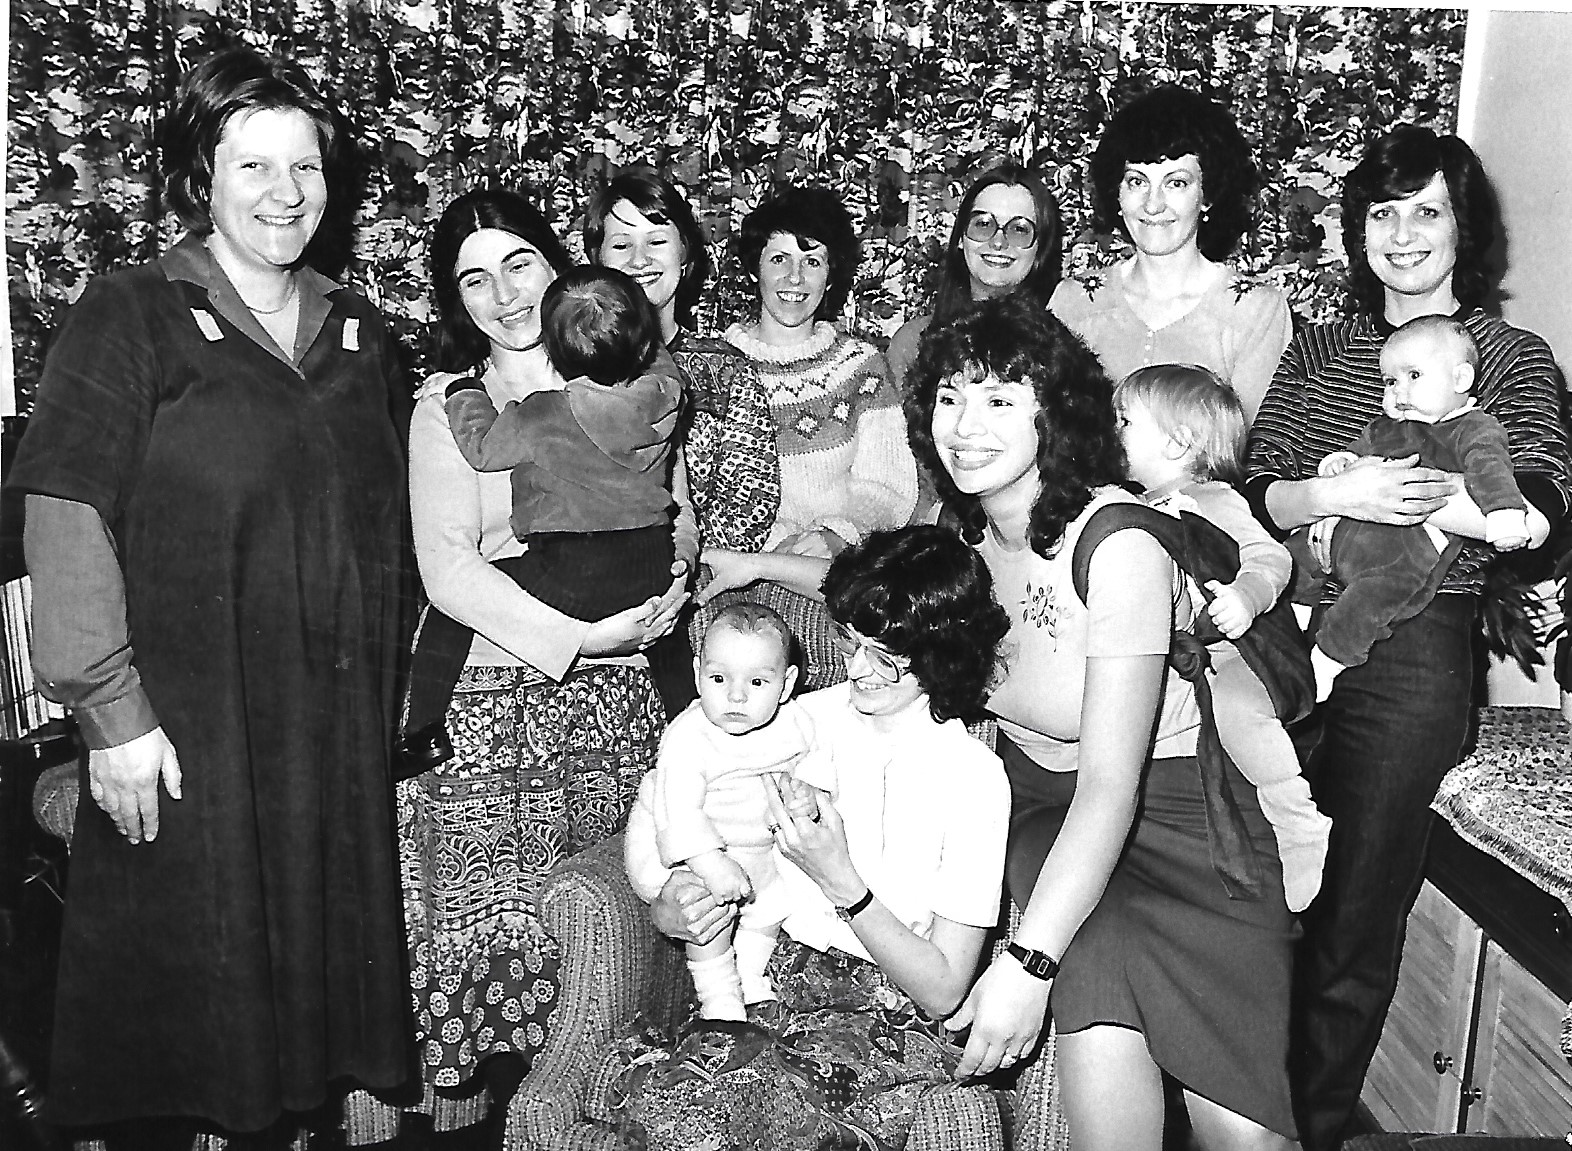 A Mothers' Help Group in Southport in January 1982